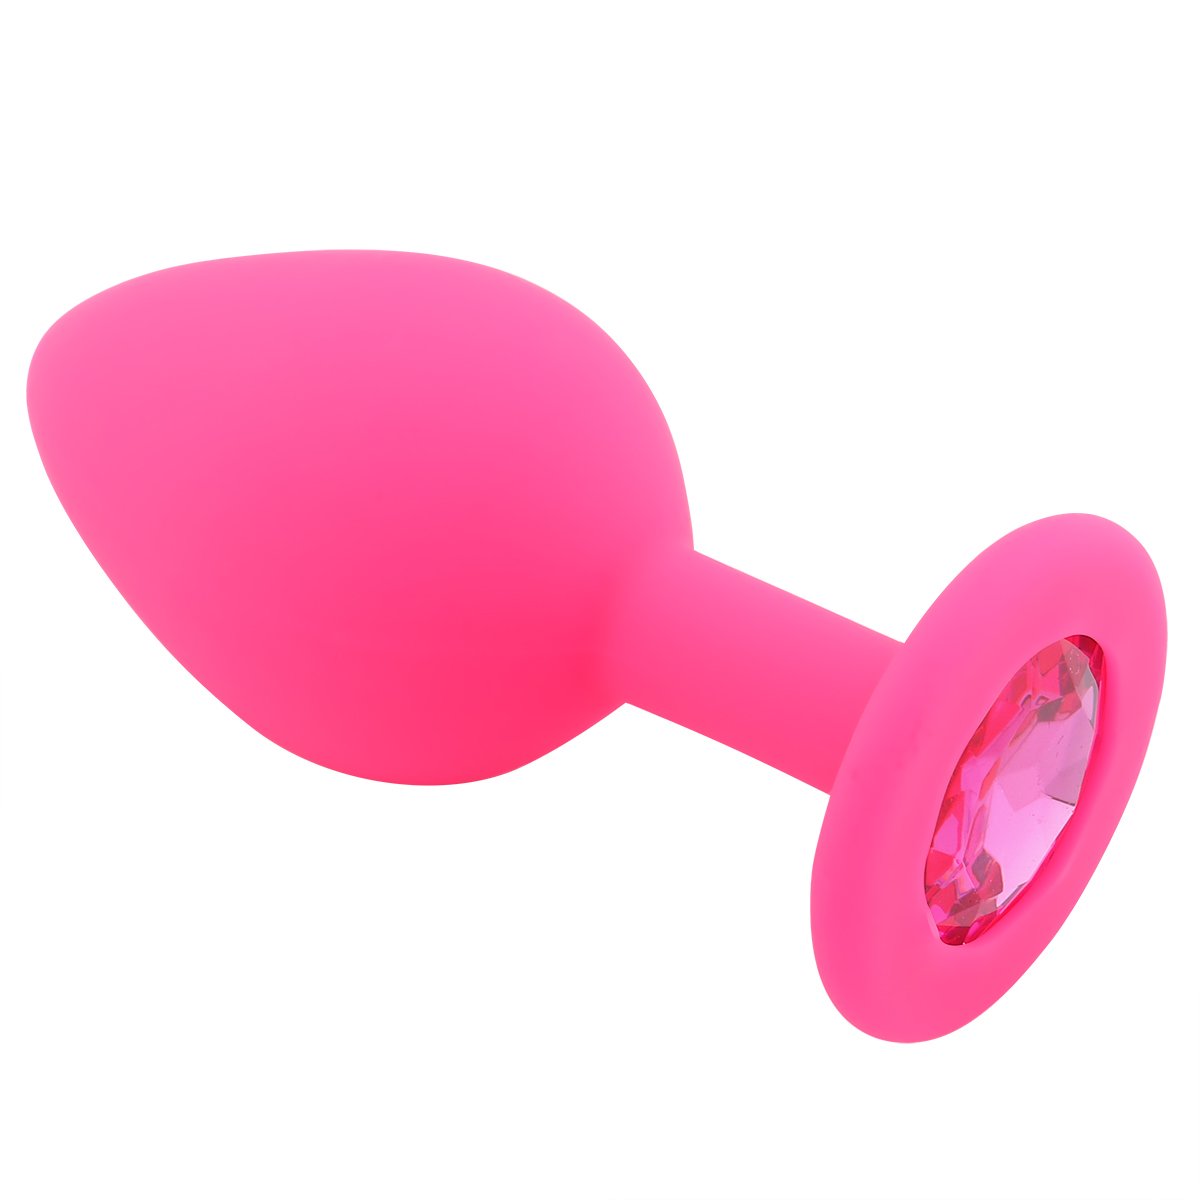 Foto van Banoch - Buttplug Caribbean Madness Hot Pink Large - Siliconen Roze Diamant